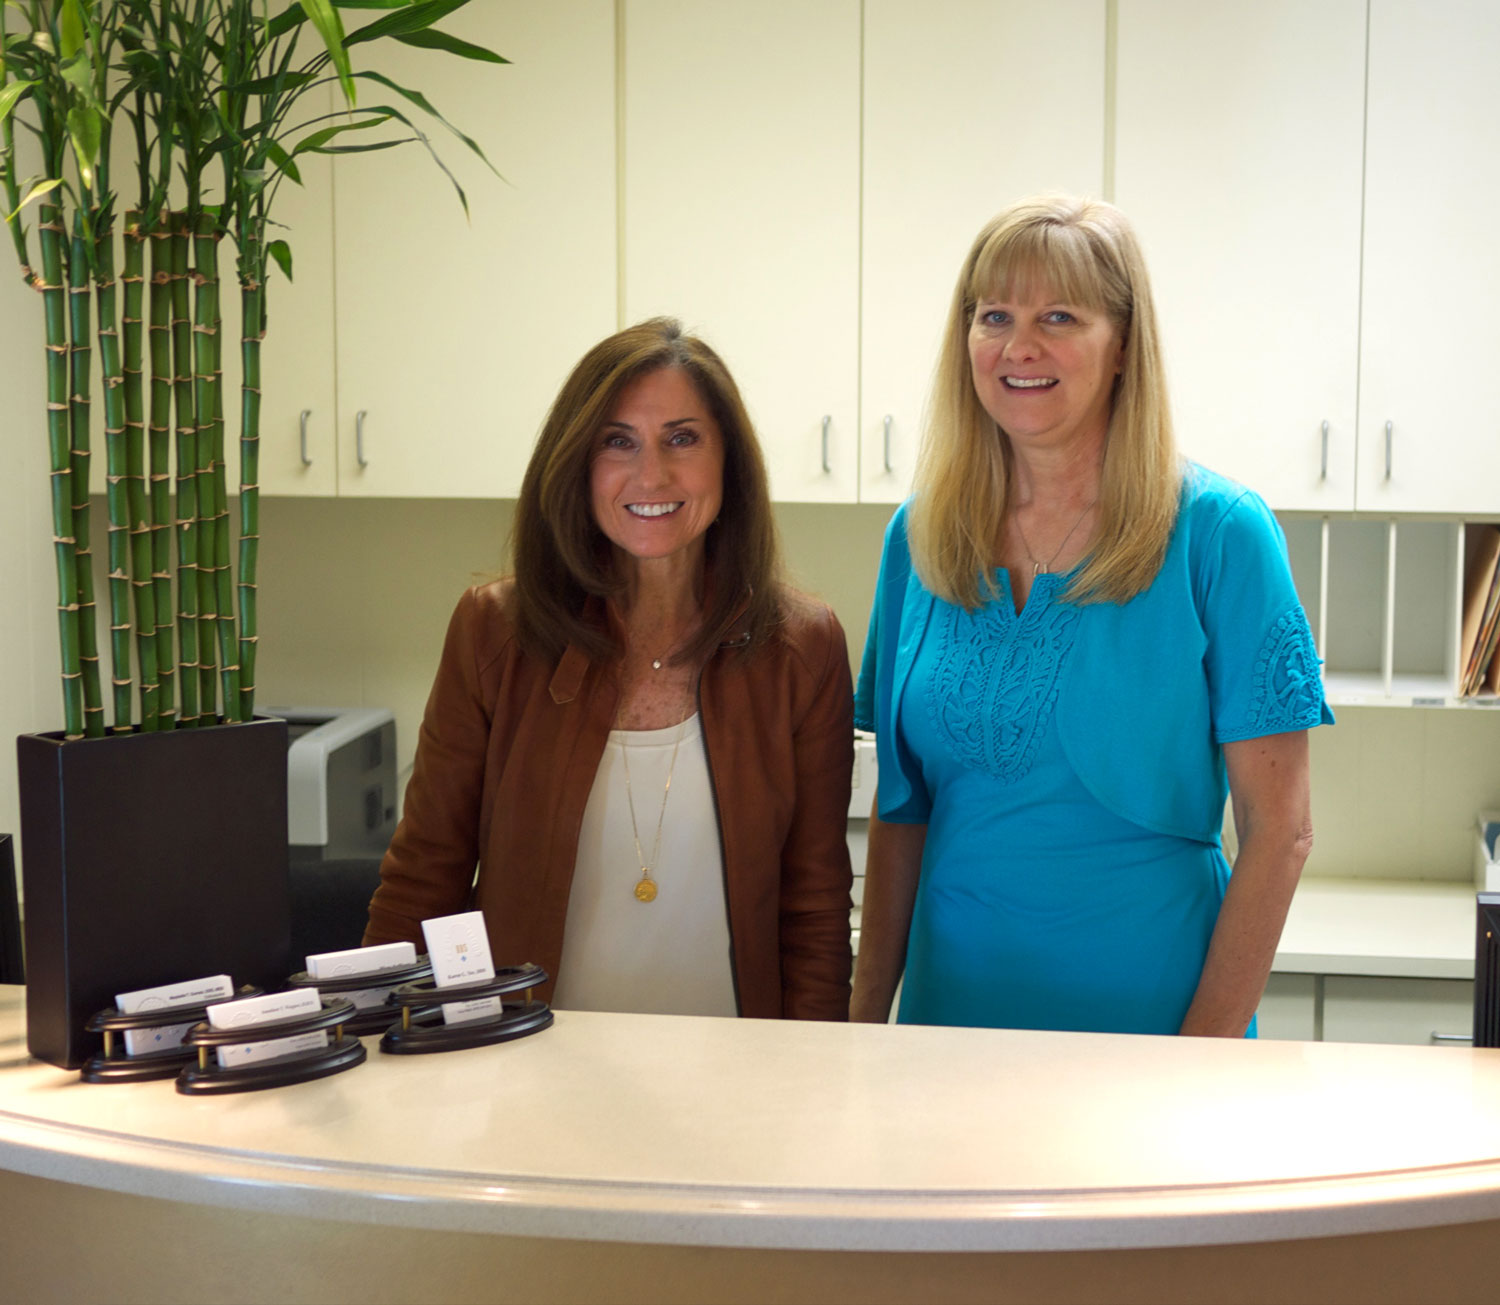 Office manager Mary and Registered Dental Assistant Kathleen